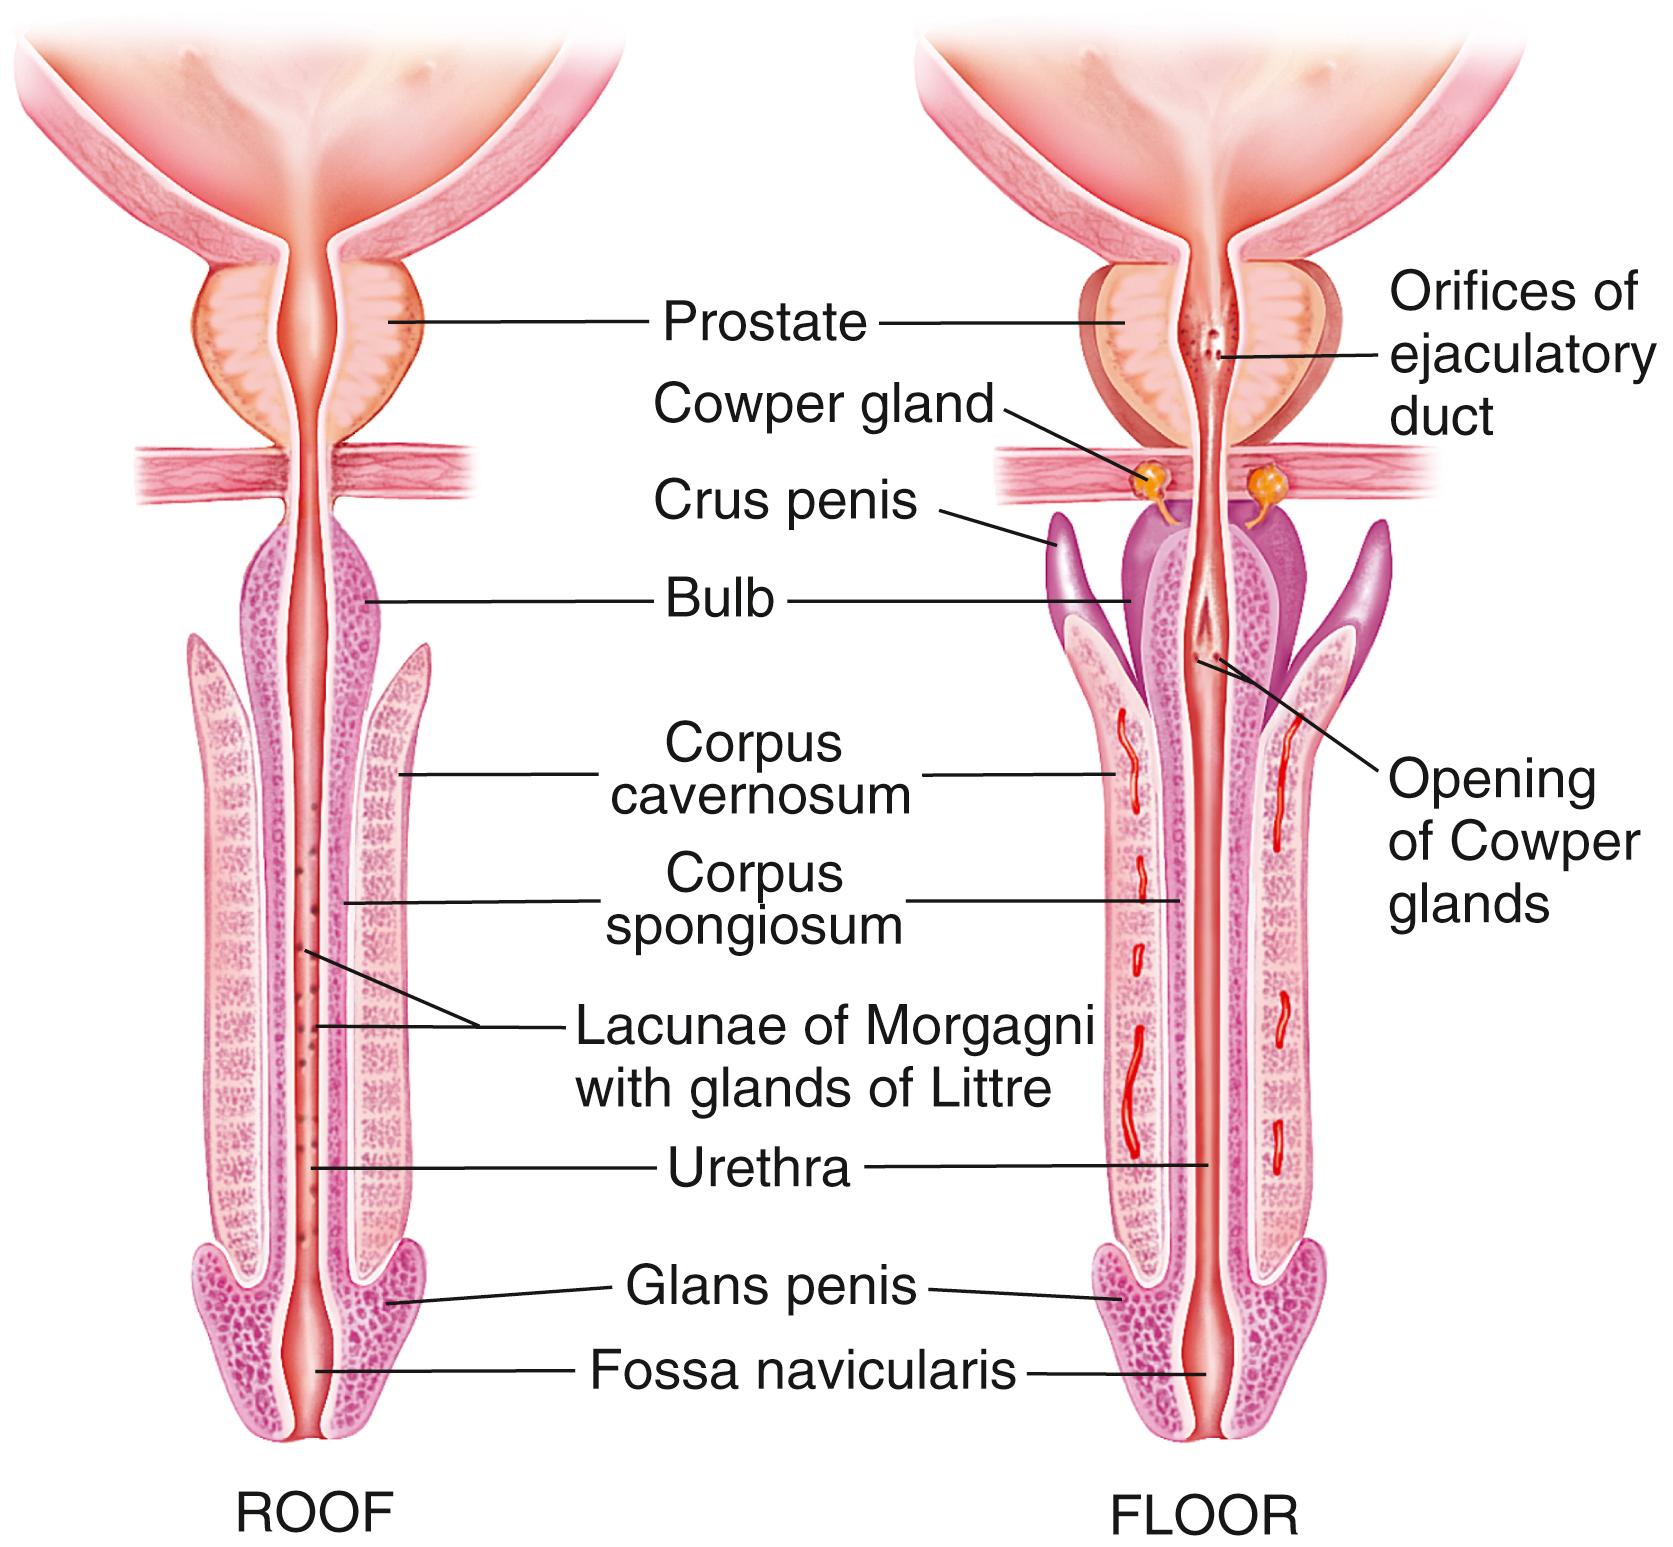 FIG. 20.3, Anatomy of urethra and penis.